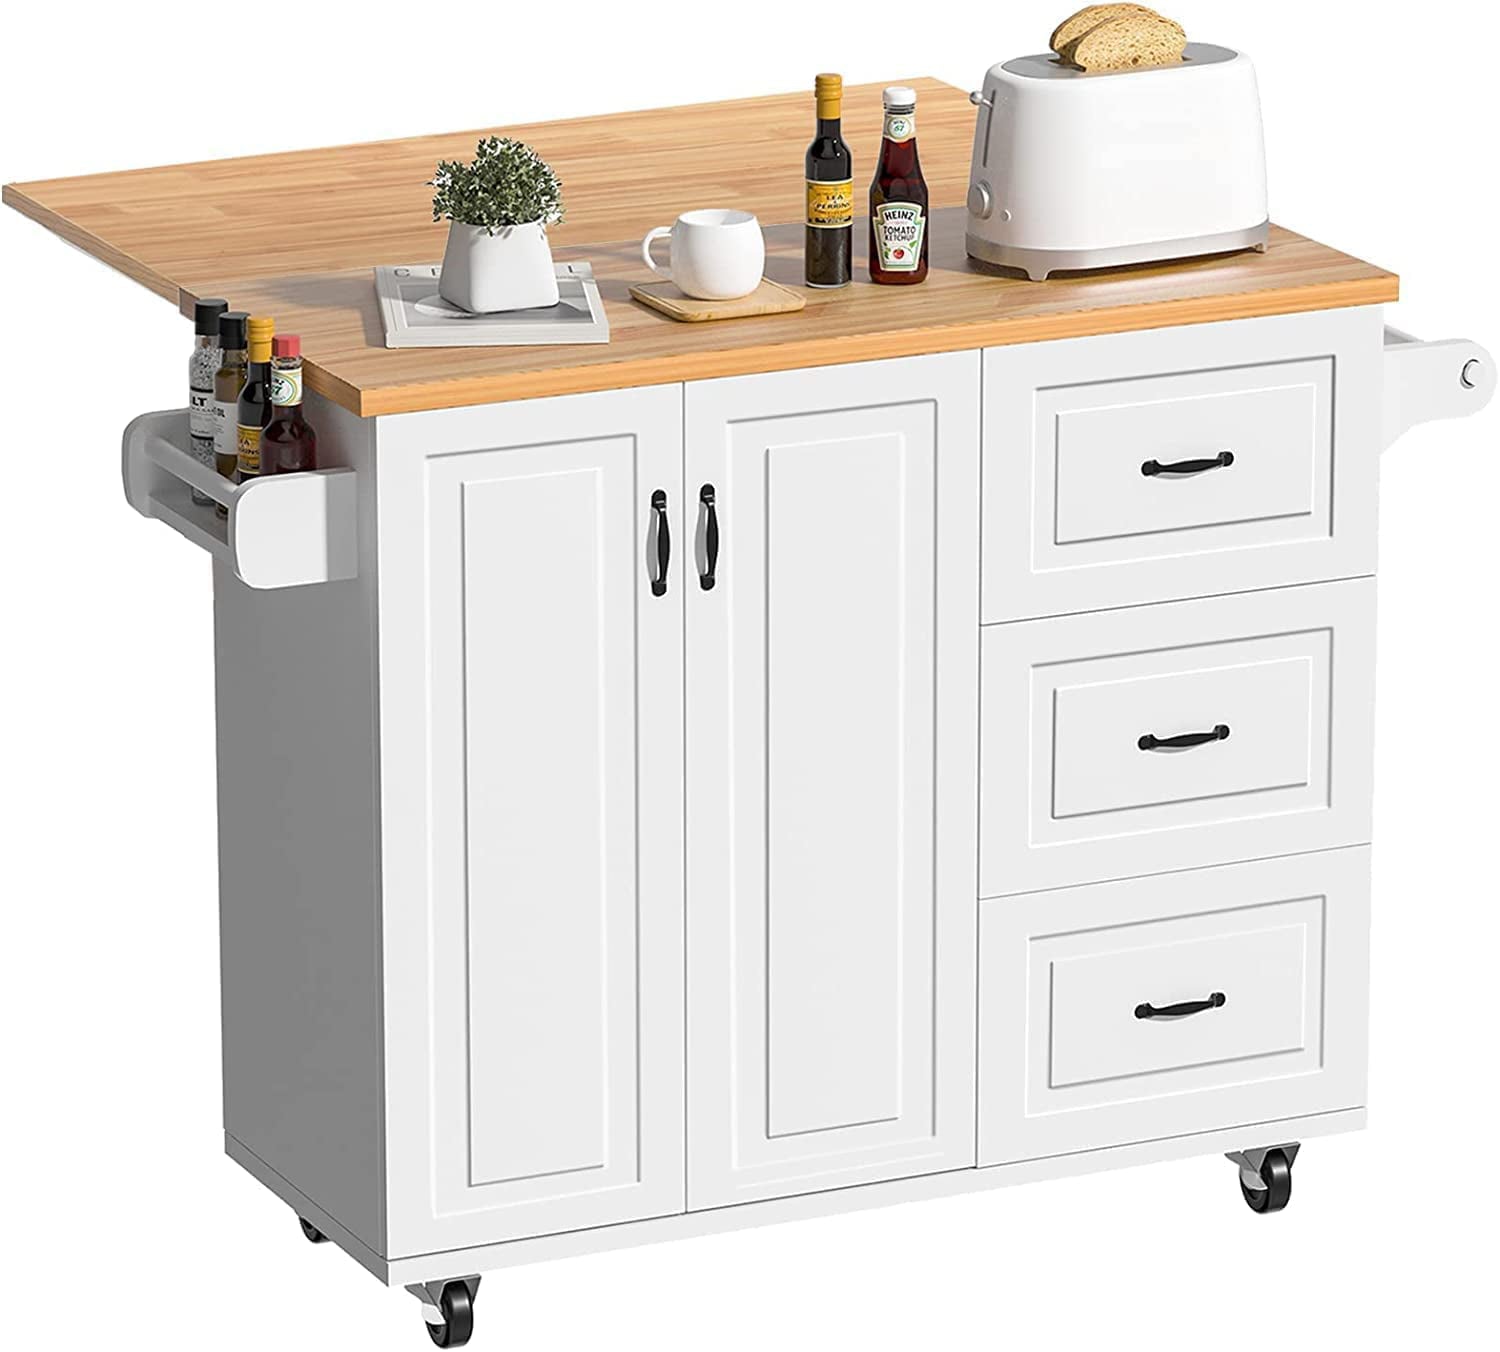 Catrimown Kitchen Island  Cart with Storage， Drop Leaf Kitchen Island on Wheels， Wood Countertop， Lockable Casters， White